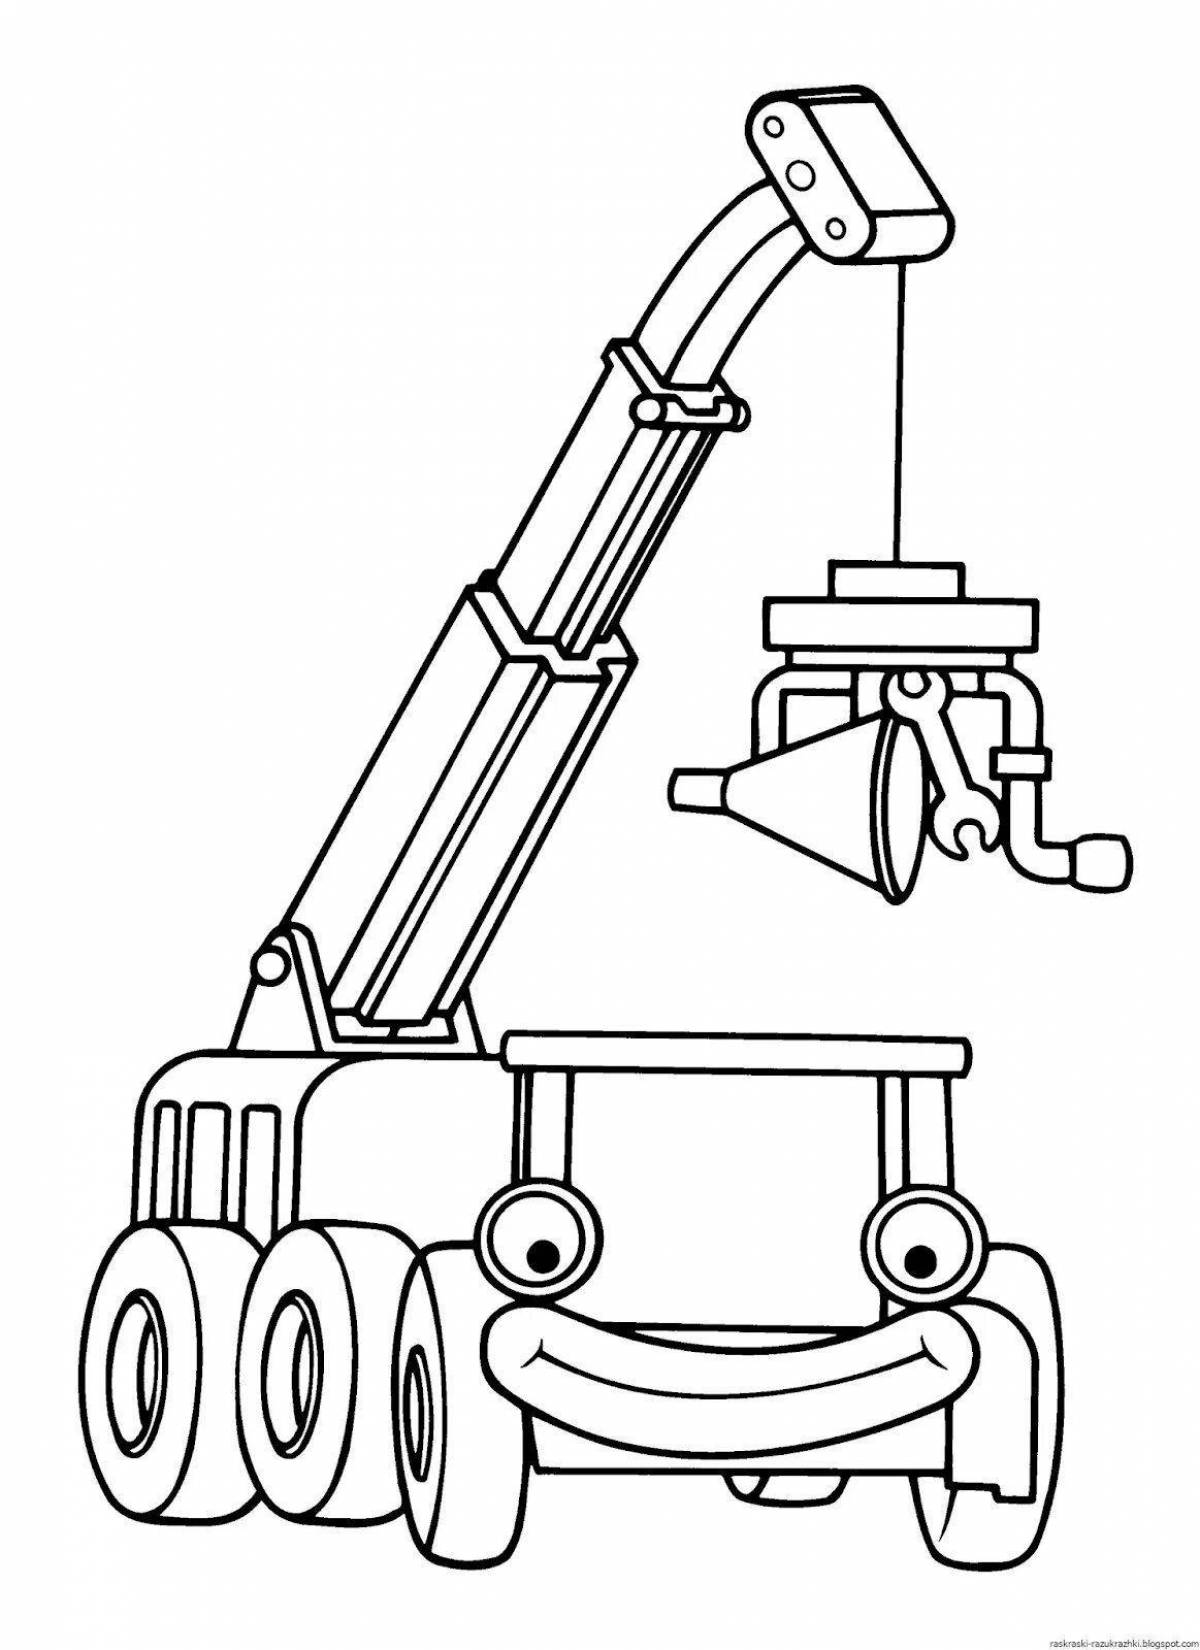 Animated tractor robot coloring page